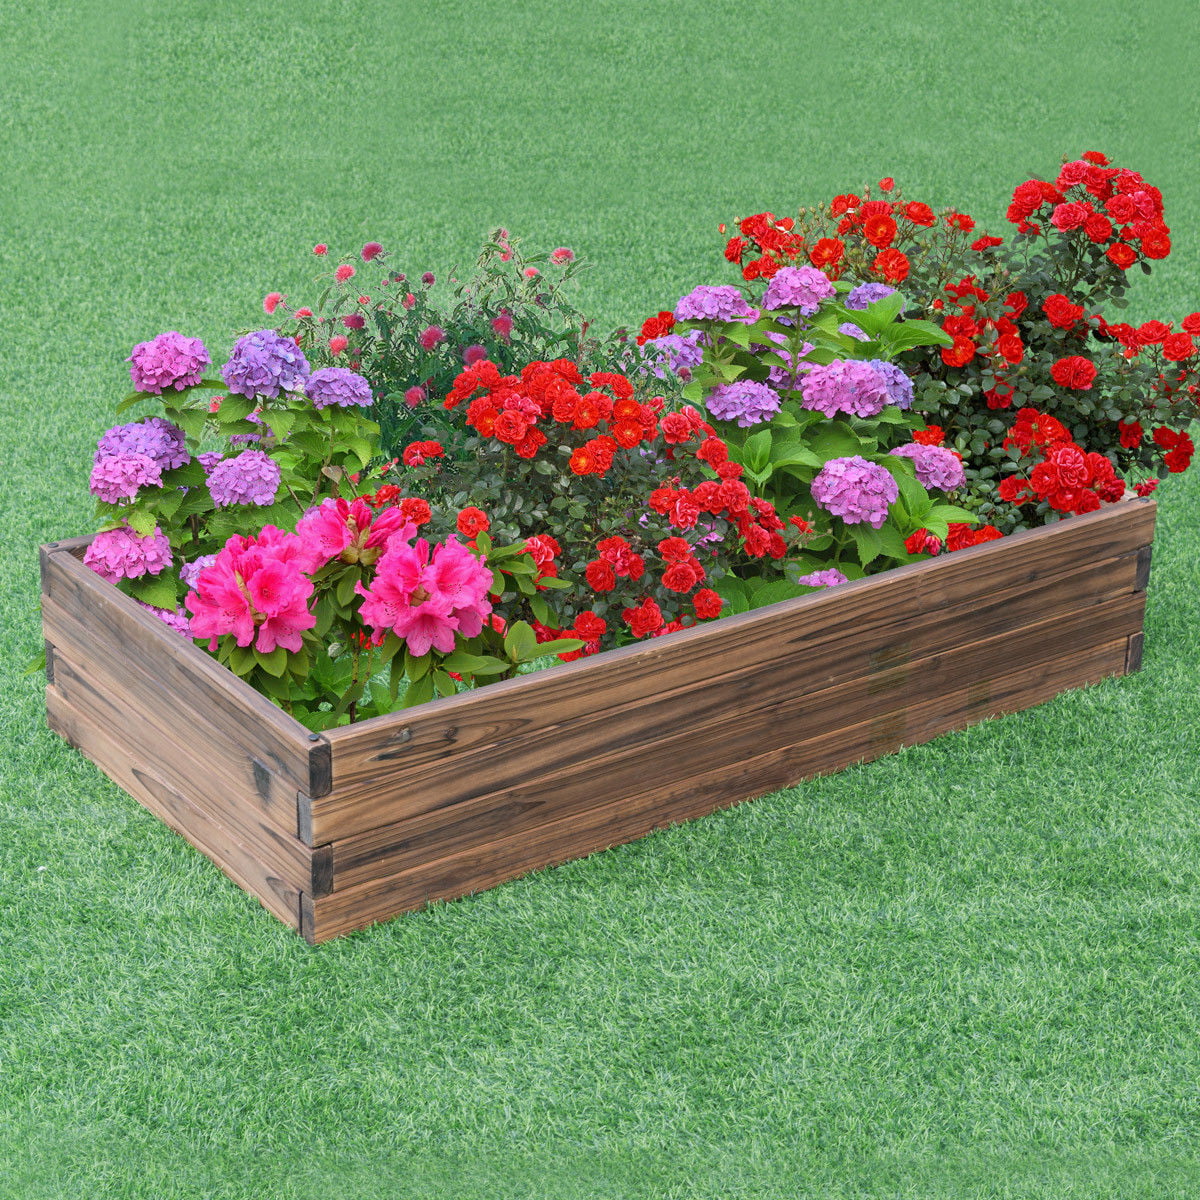 gymax wooden raised garden bed kit - elevated planter box for growing